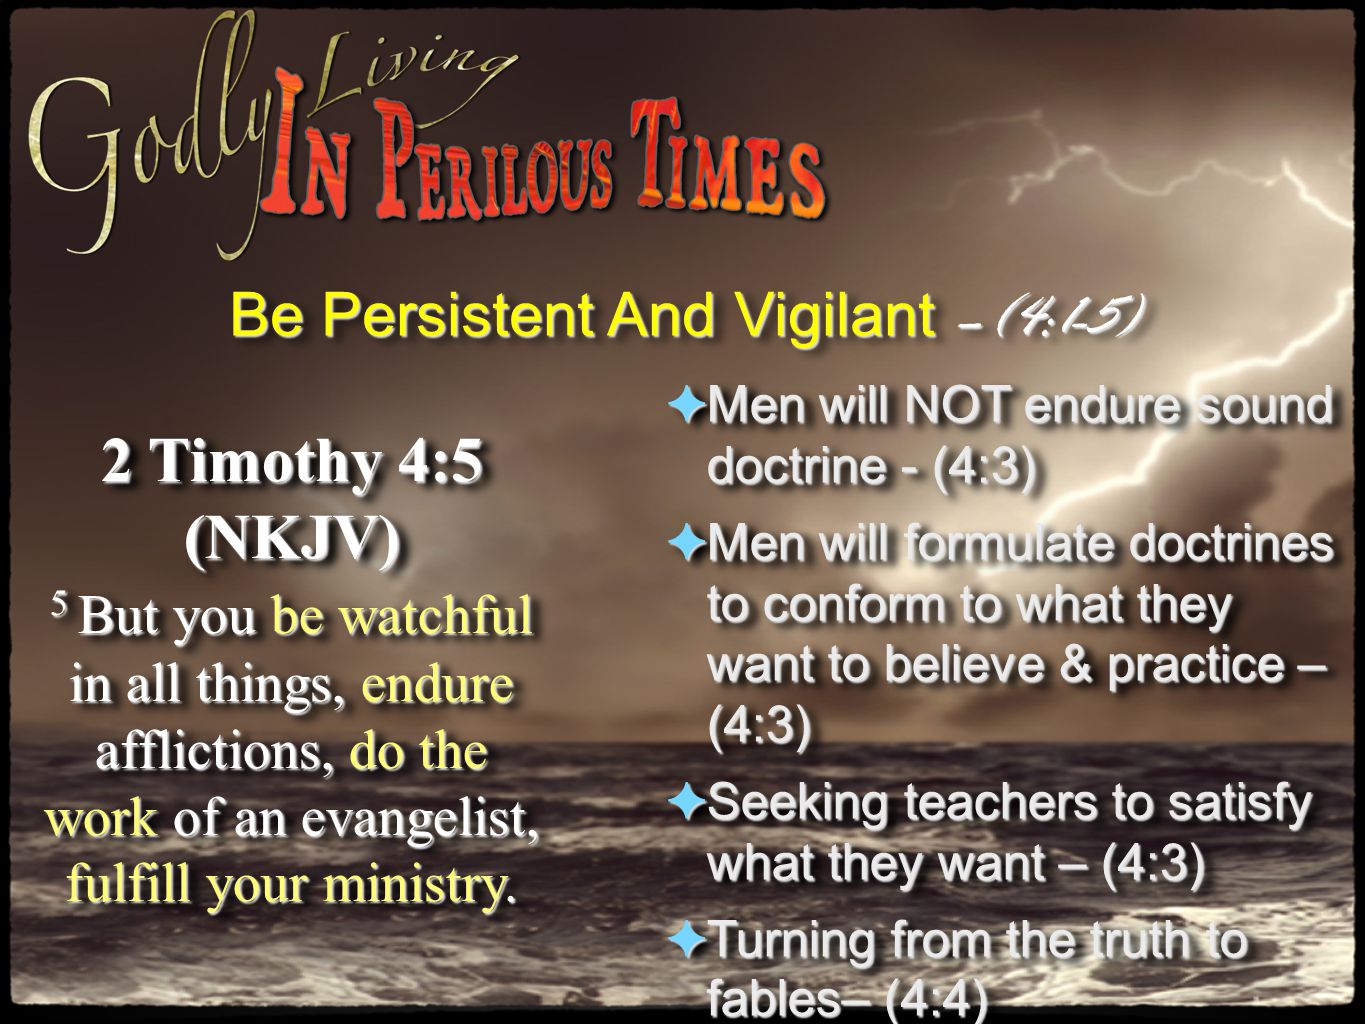 Be Persistent And Vigilant –(4:1-5) 2 Timothy 4:5 (NKJV) 5 But you be watchful in all things, endure afflictions, do the work of an evangelist, fulfill your ministry.